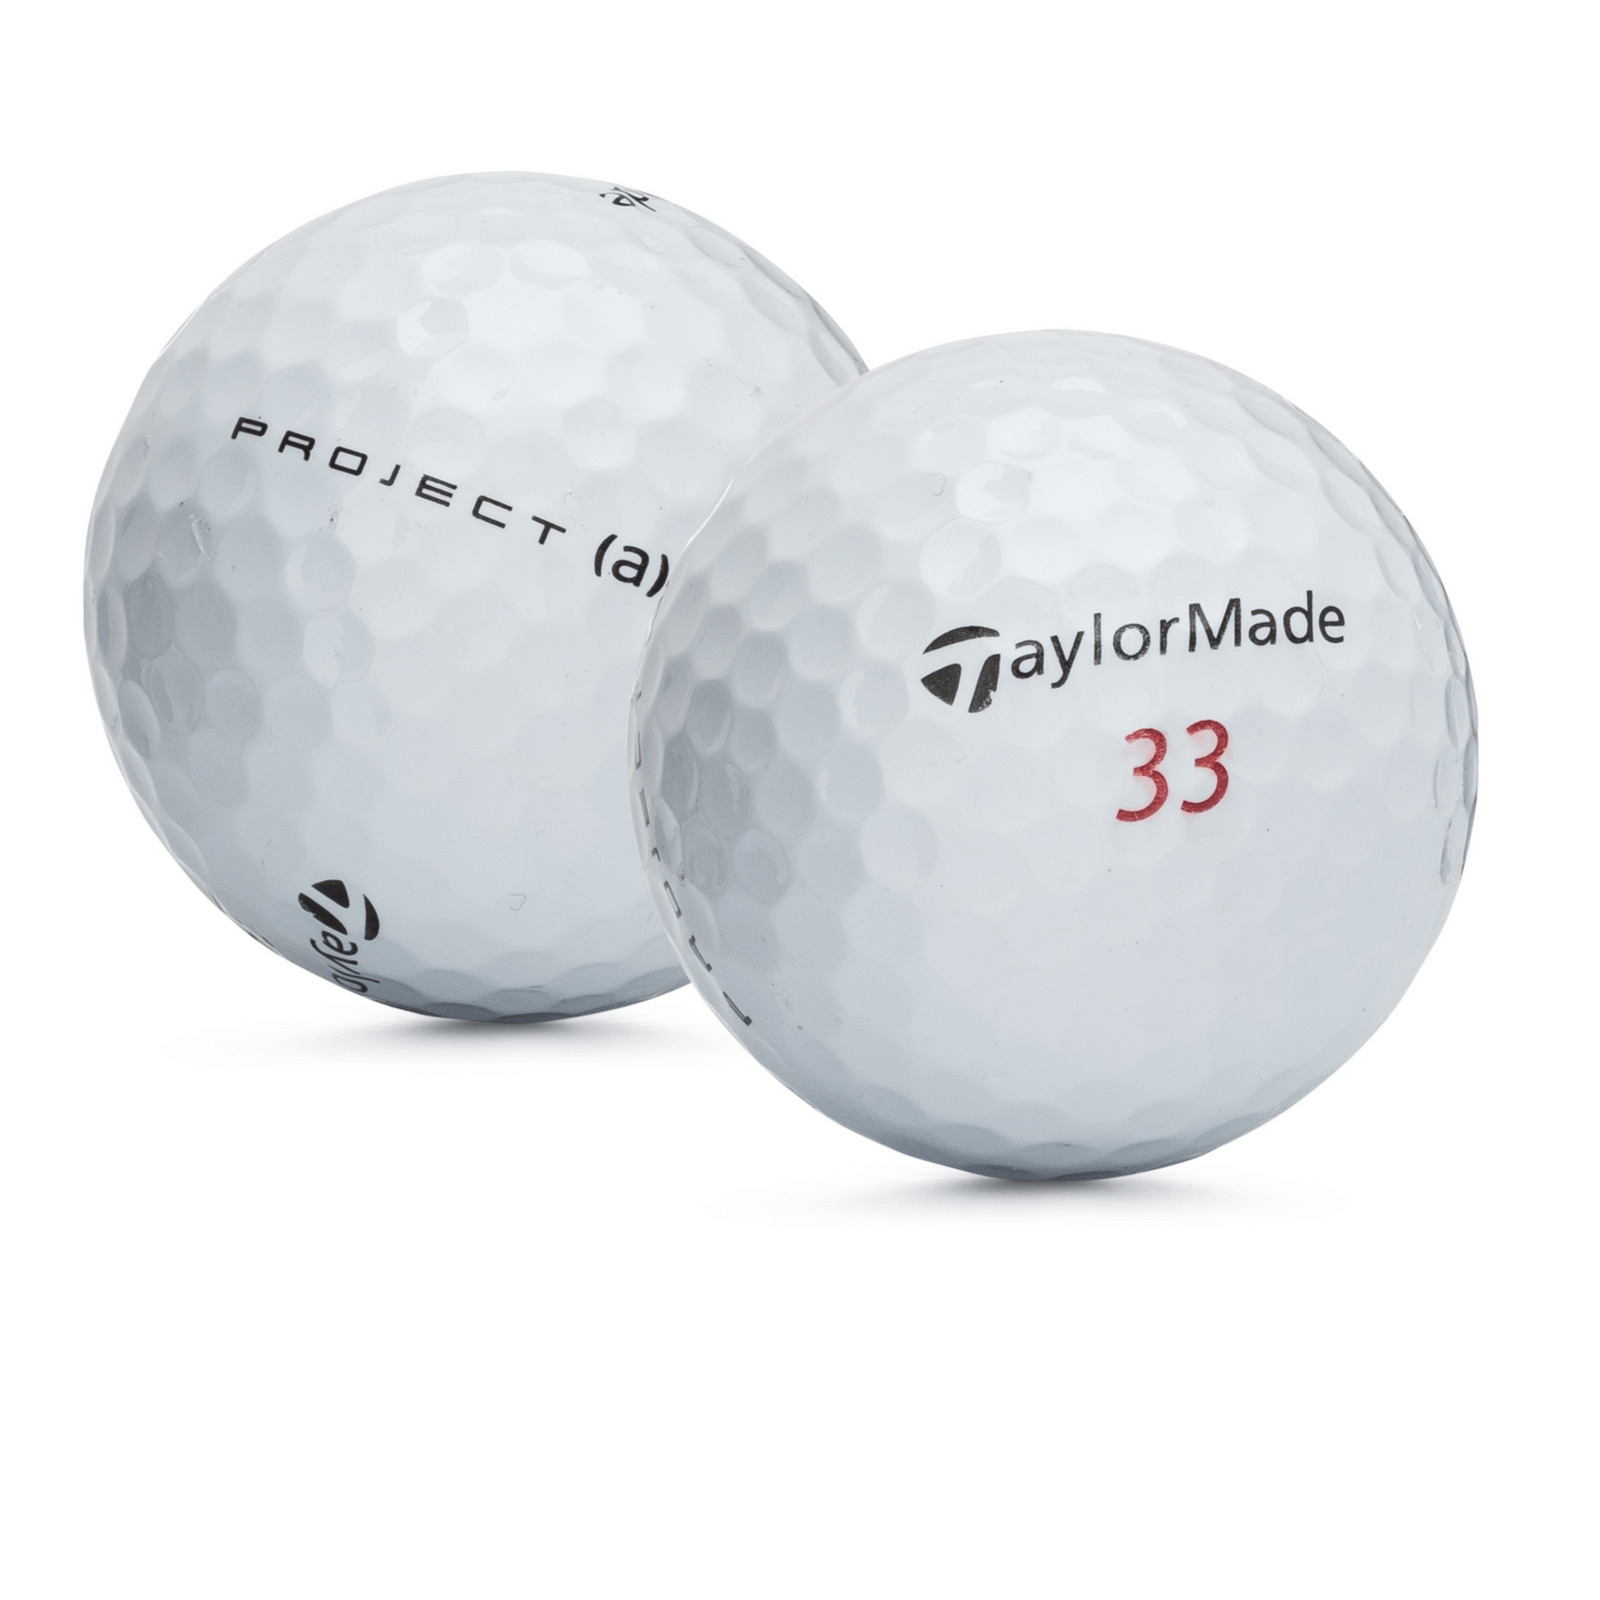 Taylormade Project (a) Near Mint Recycled Used Golf Balls, White - 48 Count